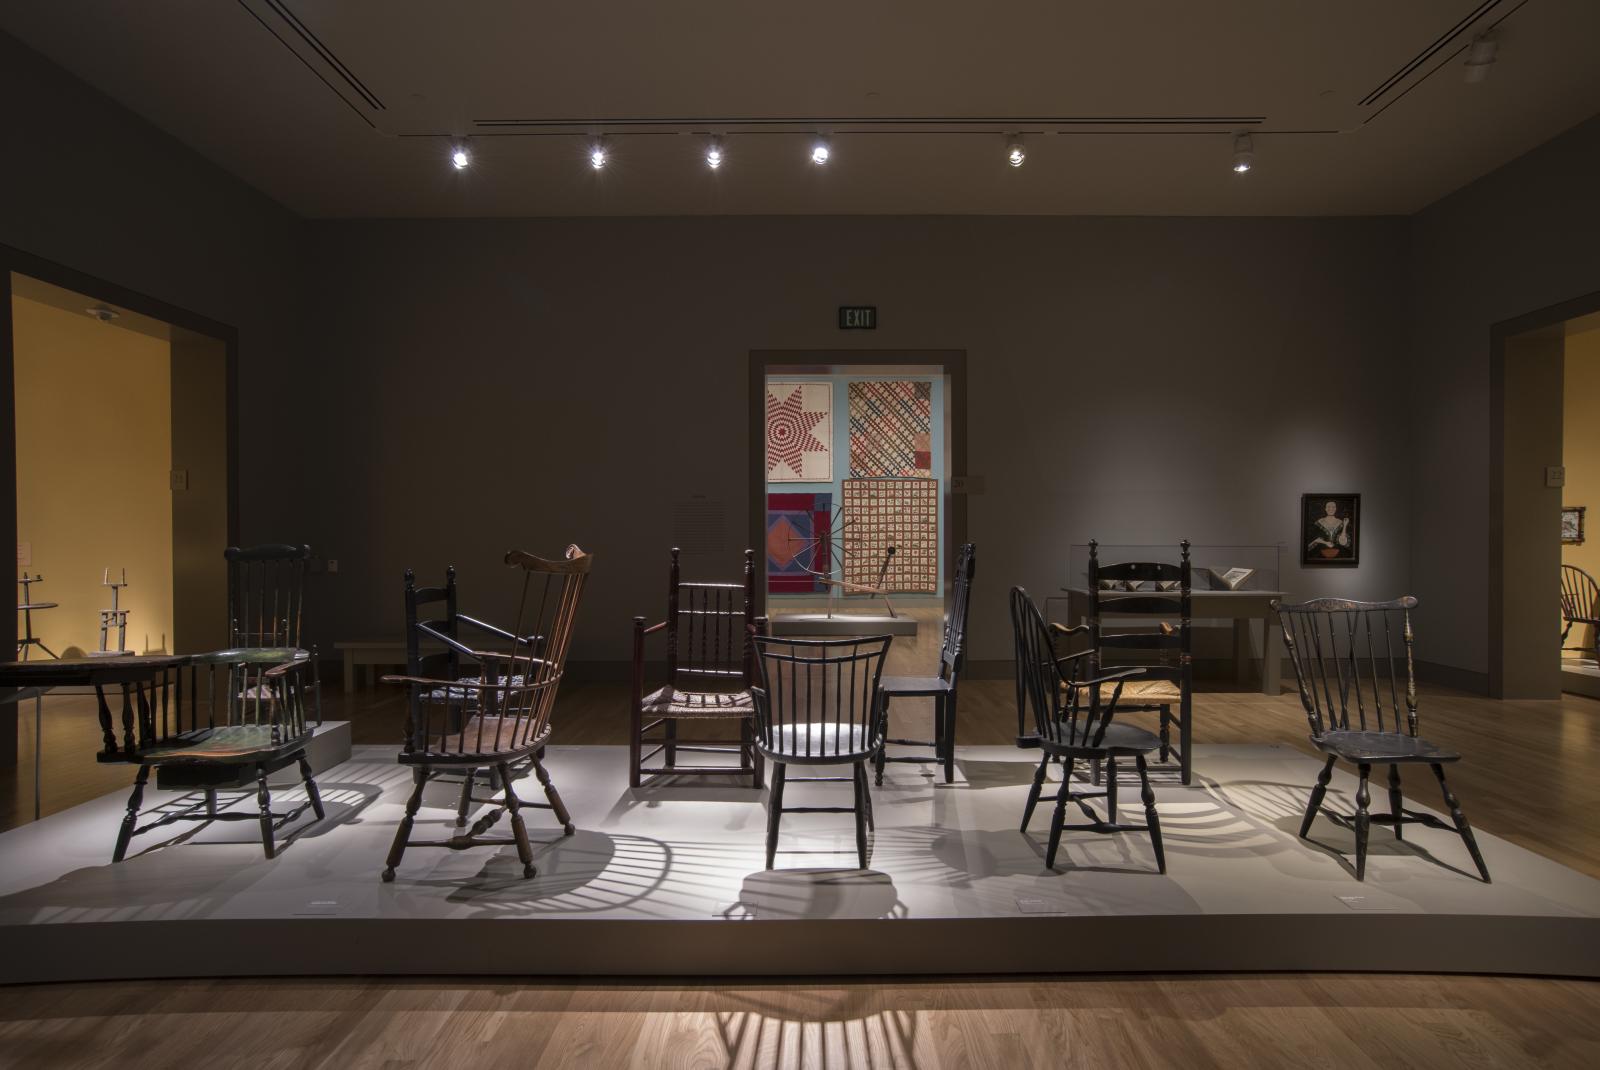 A variety of wooden early American chairs displayed in the center of a dimly lit museum gallery.